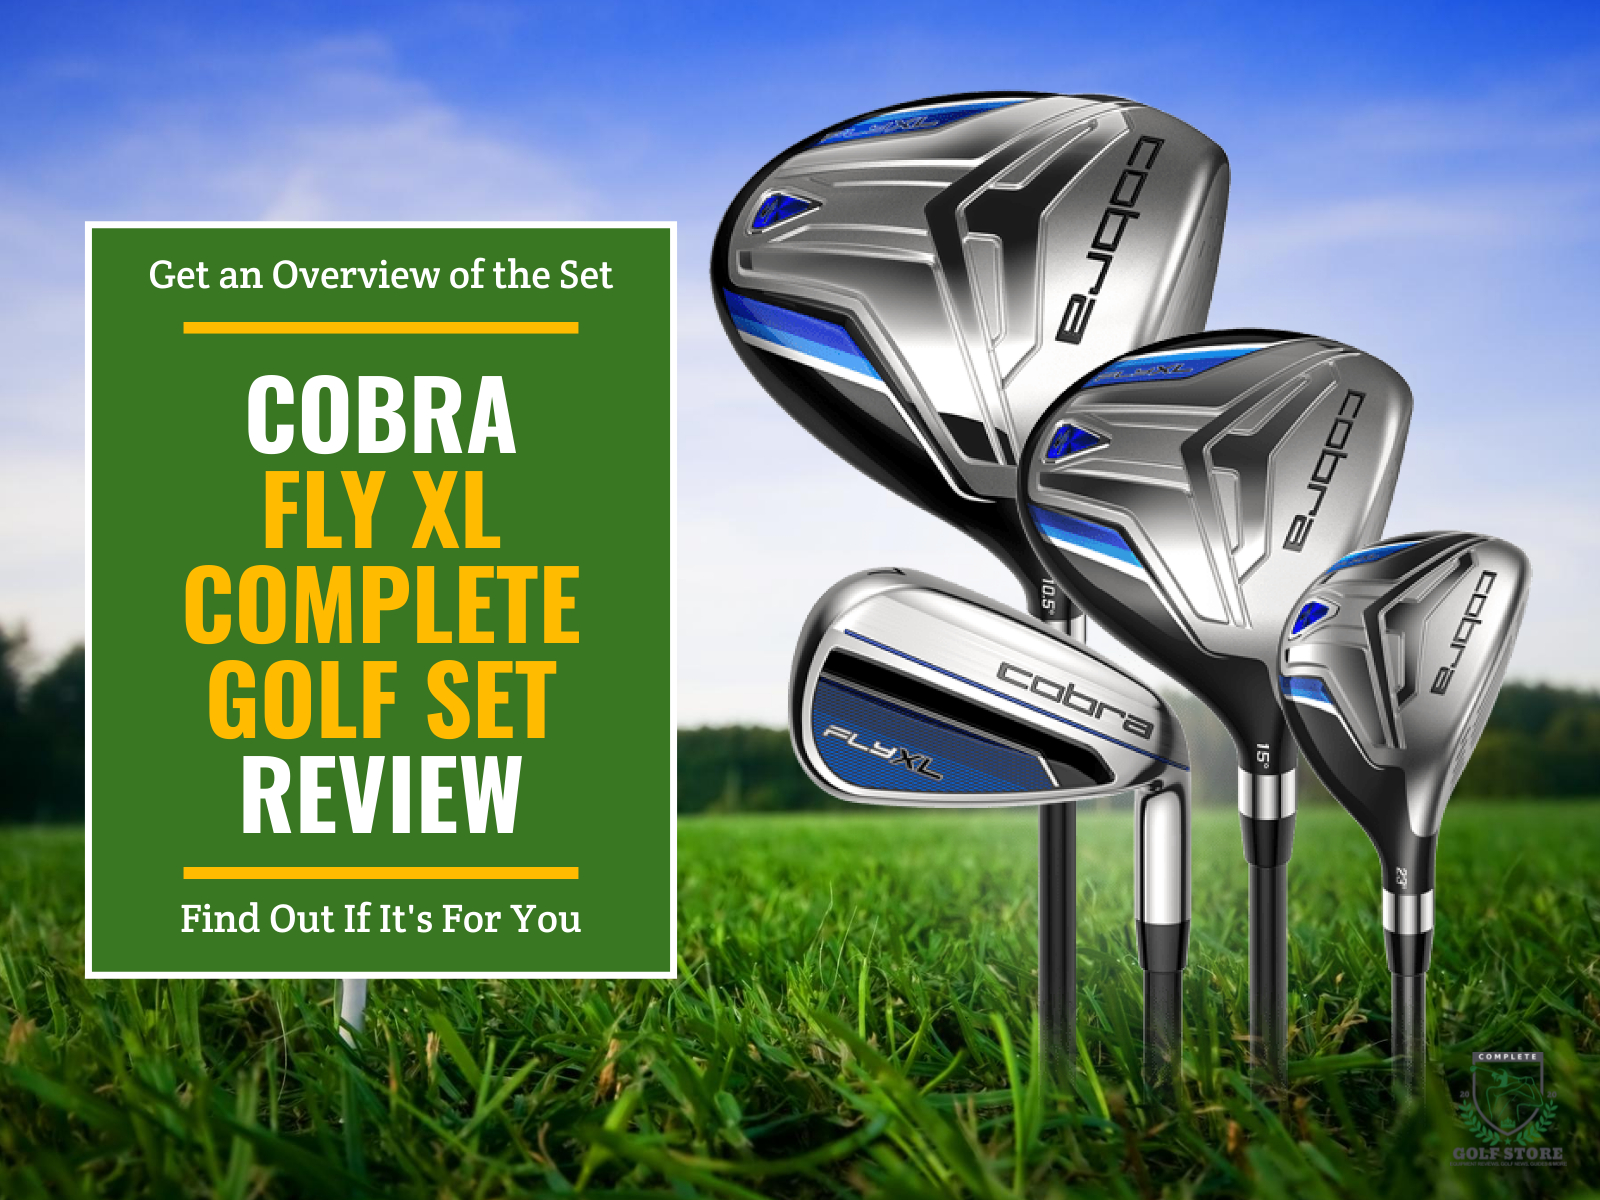 Clubheads of the different types of golf clubs included in the Cobra Fly XL Golf Set with a golf course background. Green textbox on the left contains the text 